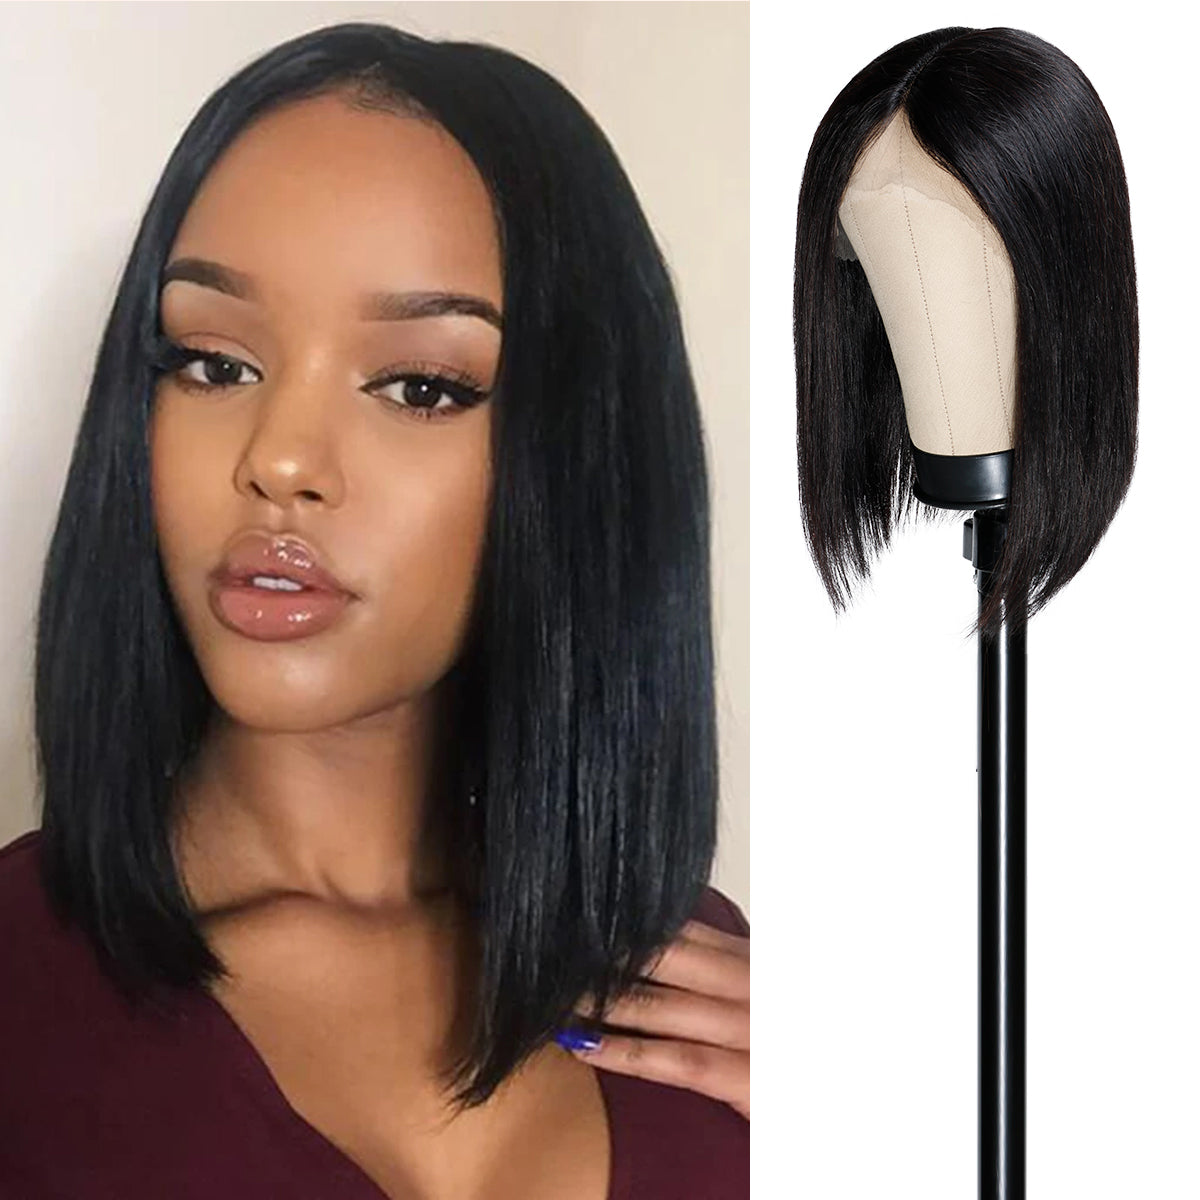 Top Grade Human Hair Center Part Bob Wig, Glueless Lace Front Wigs, Unprocessed Virgin Human hair, You can dye or bleach and perm, 150 Density hair with Pre-Plucked Hairline, Real & natural looking human hair lace wig, Perfect hairstyle for all season